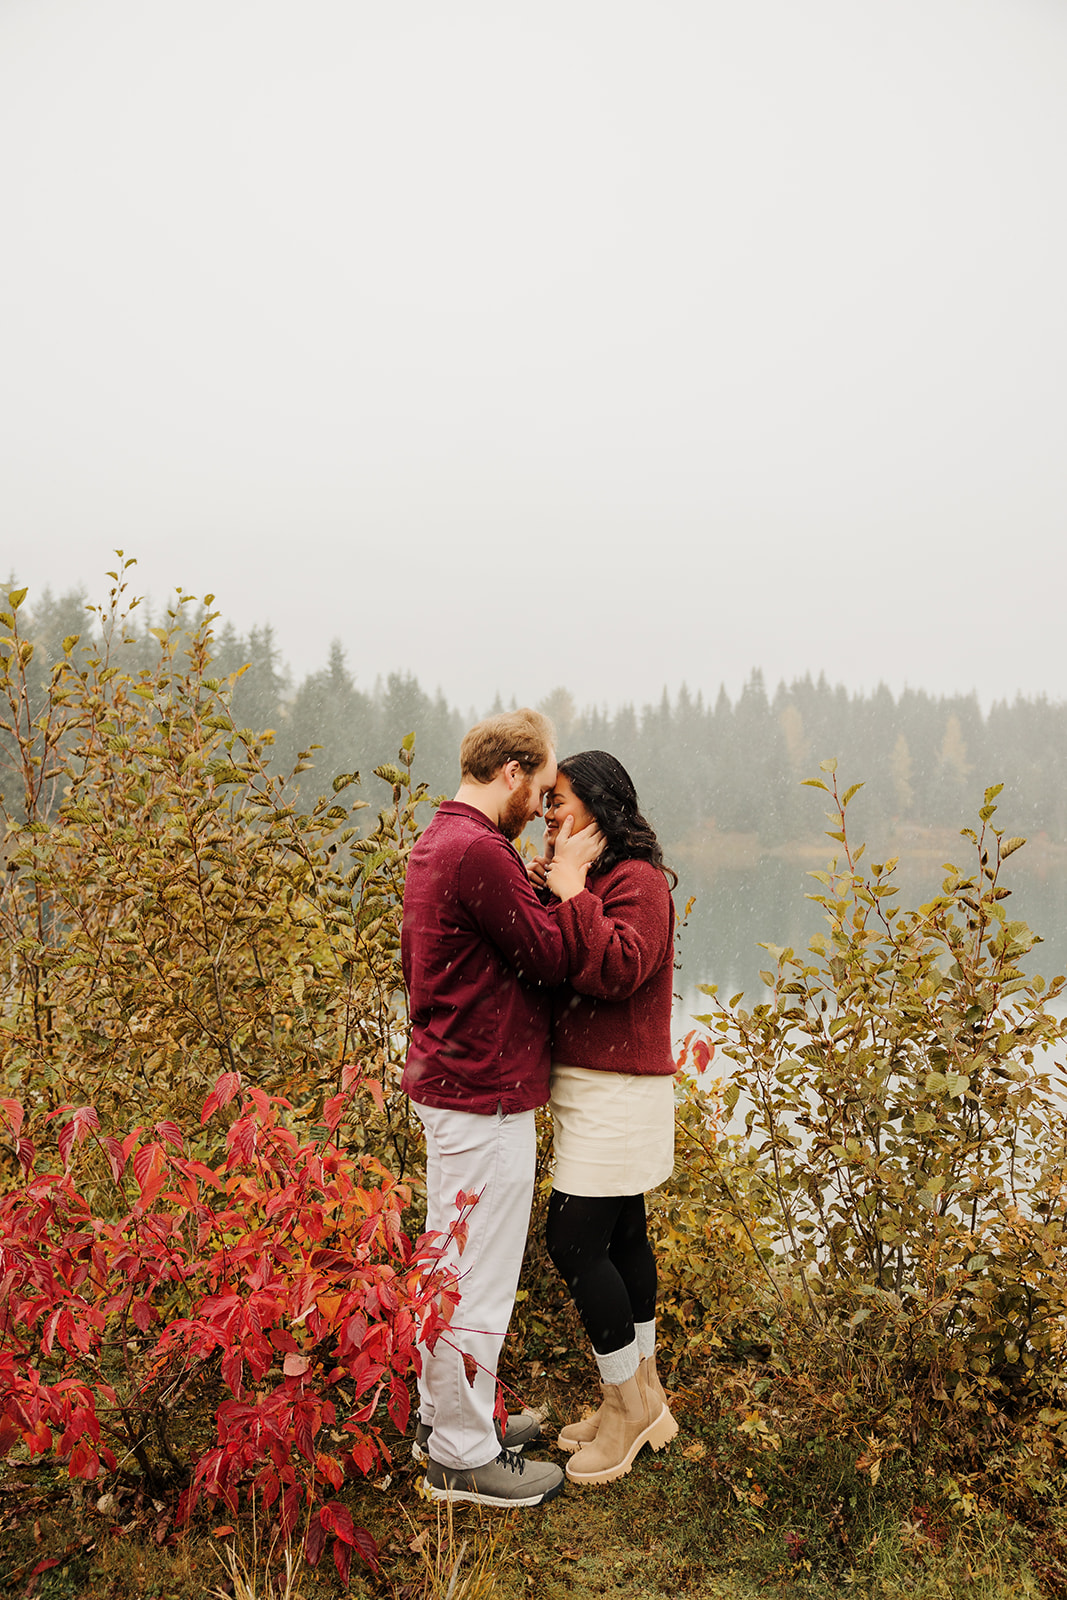 A photo of a loving couple embracing one another near a winter pond in the mountains of Washington while the snow falls.